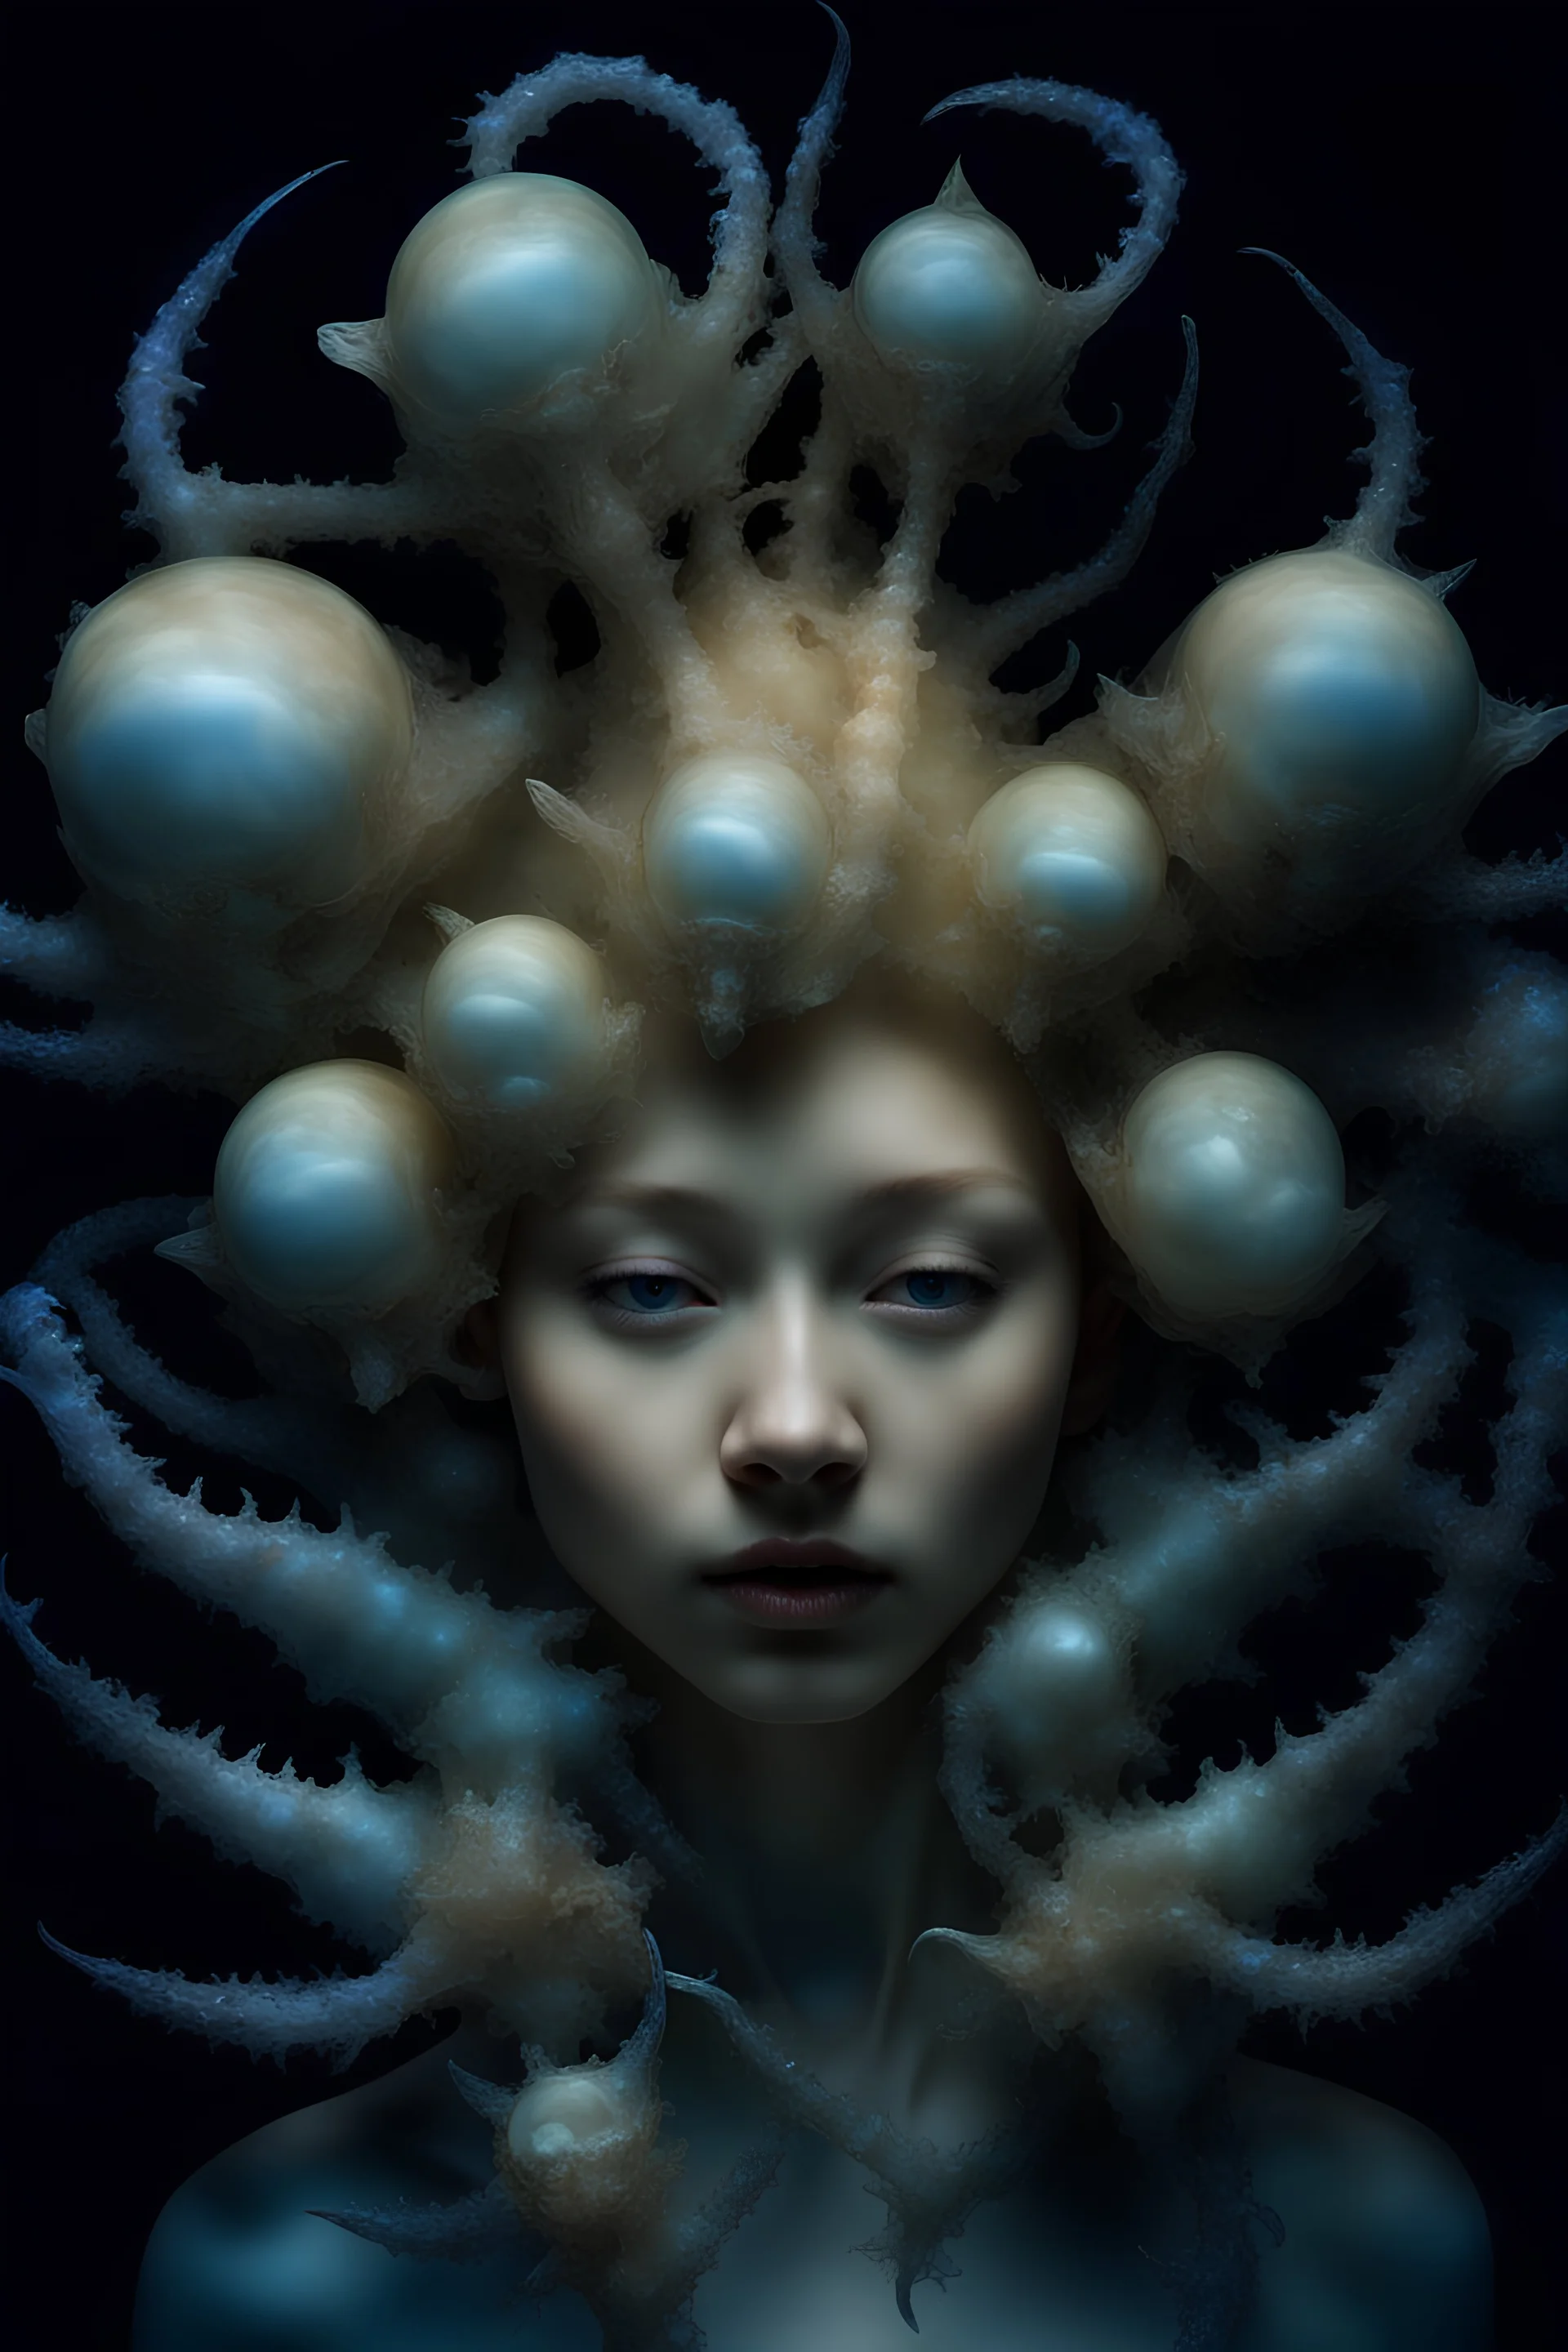 Surreal Photography: Hybrid Traslucent glossy skin Girl X Glaucus atlanticus, ironic smile, enveloping her head a mind-bending honey bulbous amorphic baby doll heads shaped reveals the inside, an enigma within an enigma, elbows of motherpearl Hybrid scorpion X anatomic bones isometric Mandelbrot/multiplied, Fur fluids morphing in a moon on her eyes. Mind-Bending, psychedelic photograph and hyper-surreal atmosphere, darkness and vulnerability, insane details. HDR. 8K